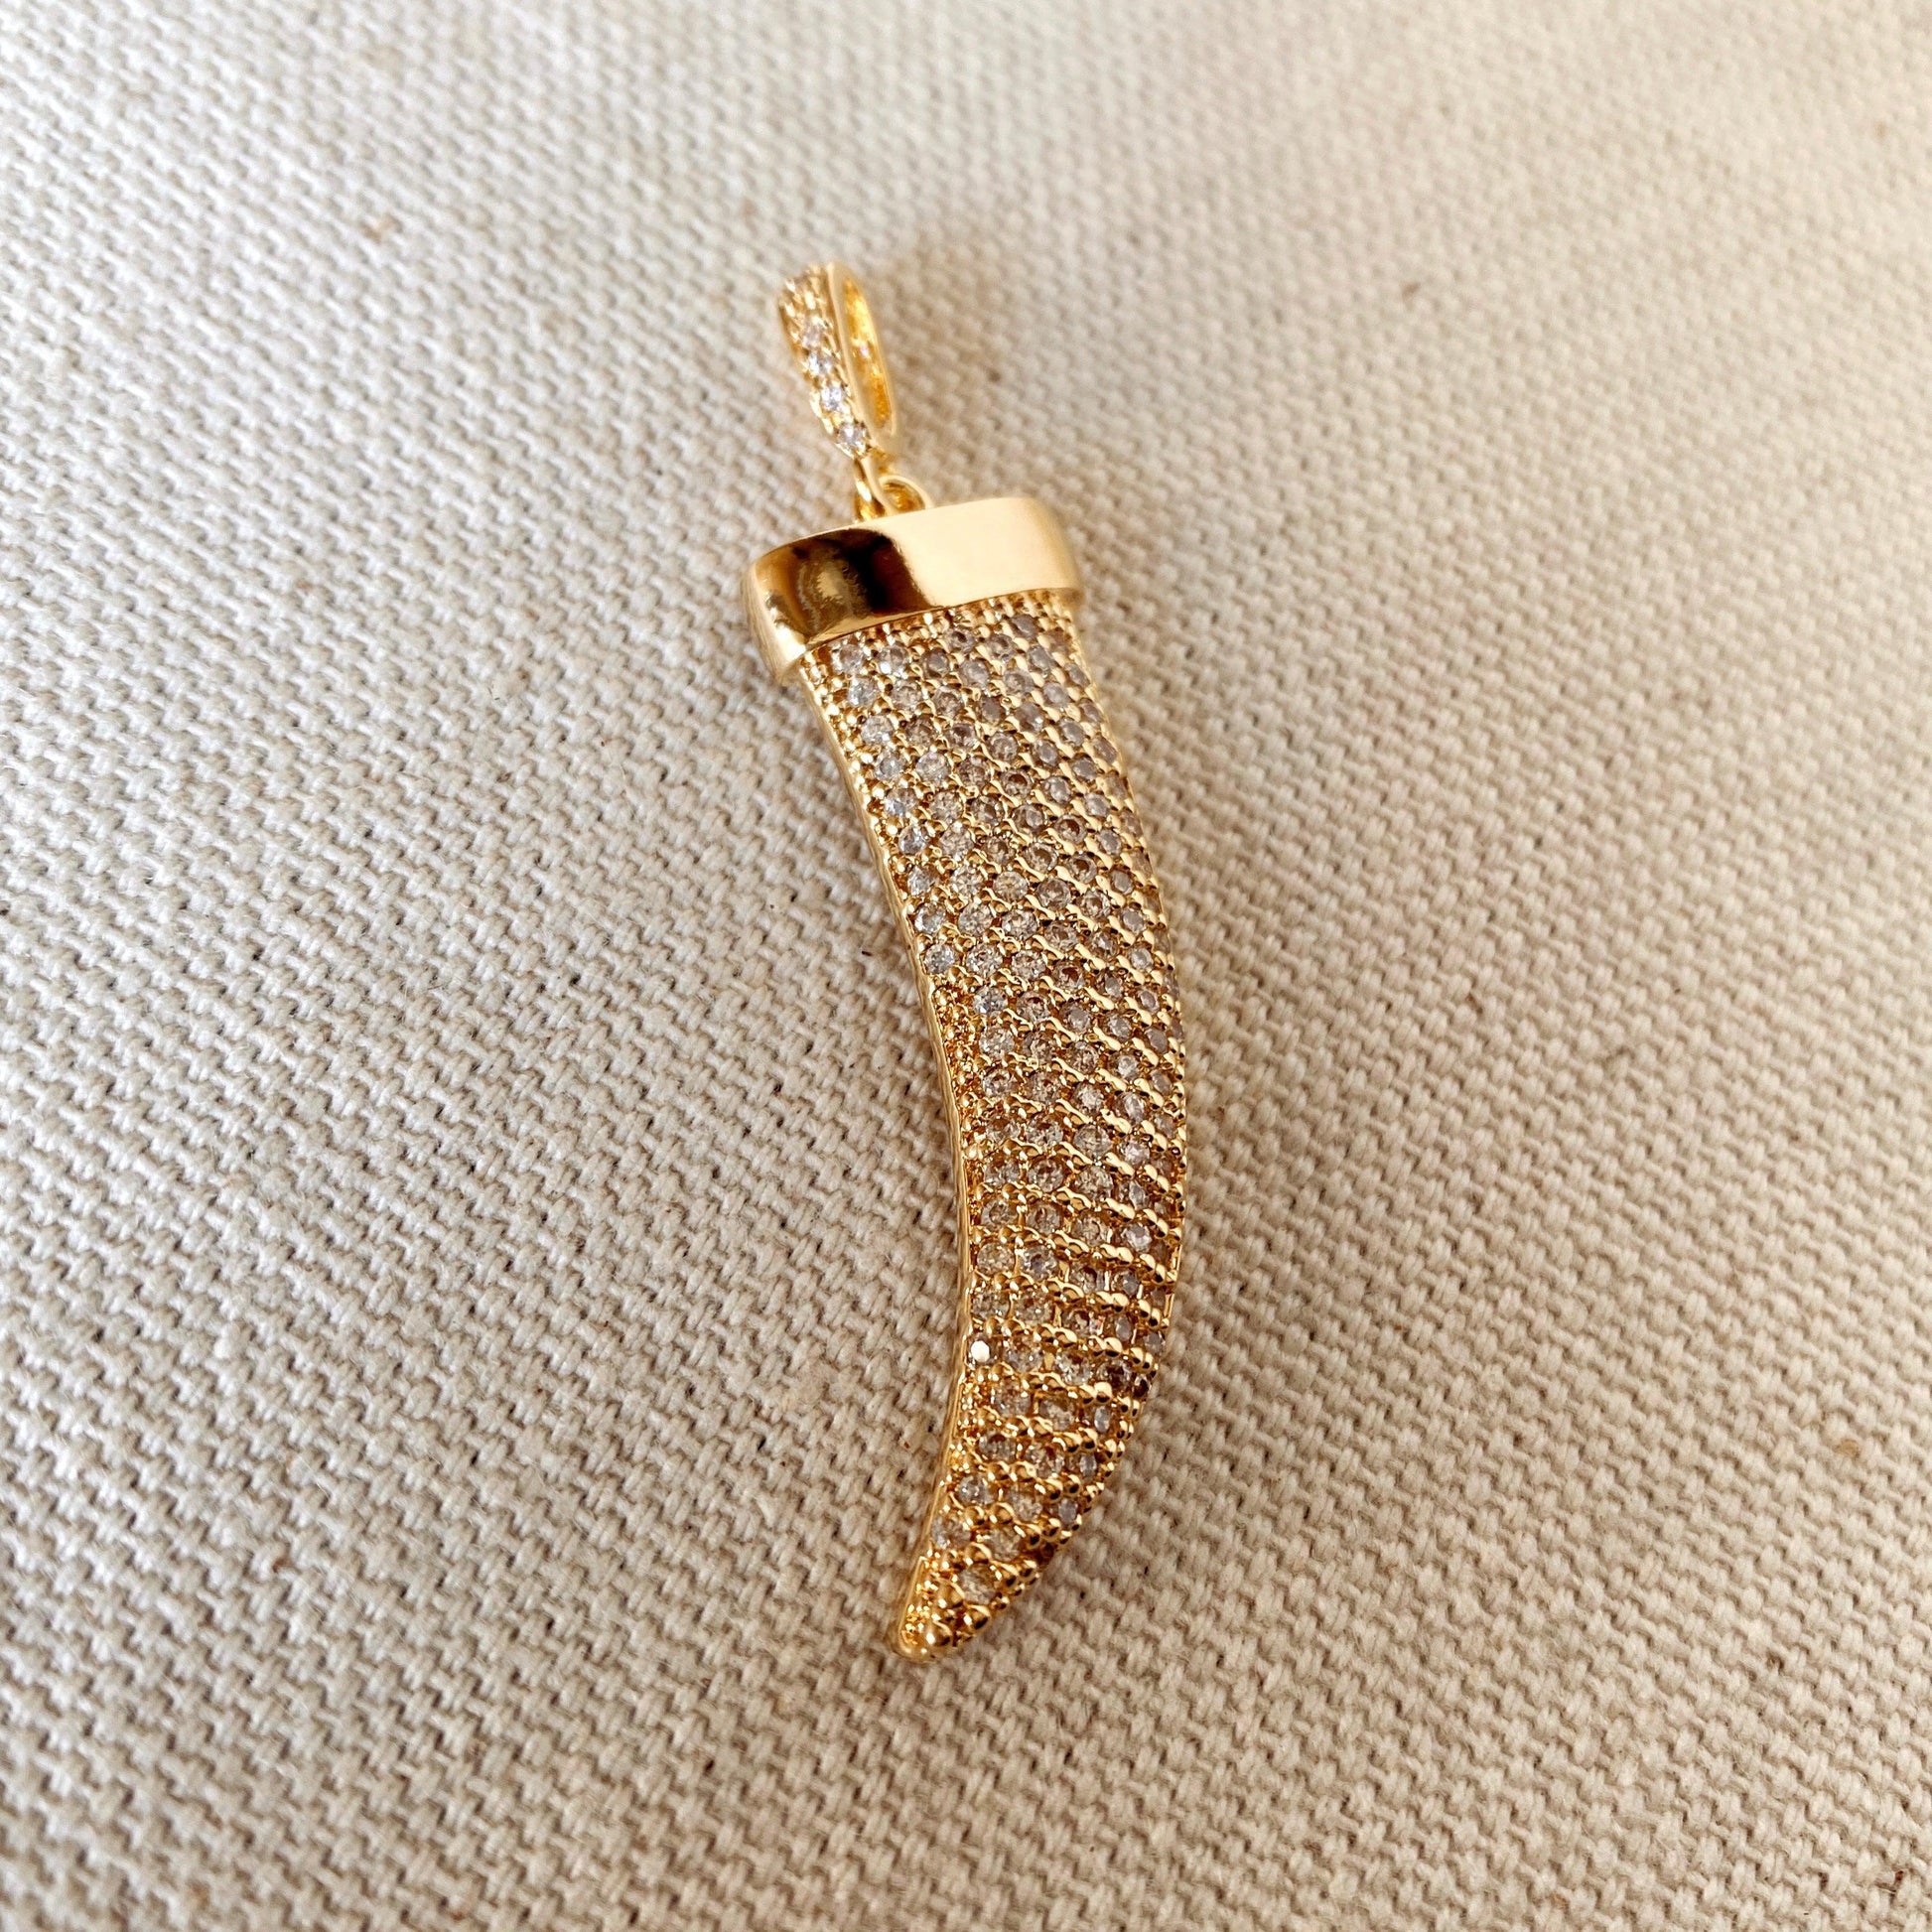 GoldFi Clear Cubic Zirconia Tusk Pendant Made of 18k Gold Filled